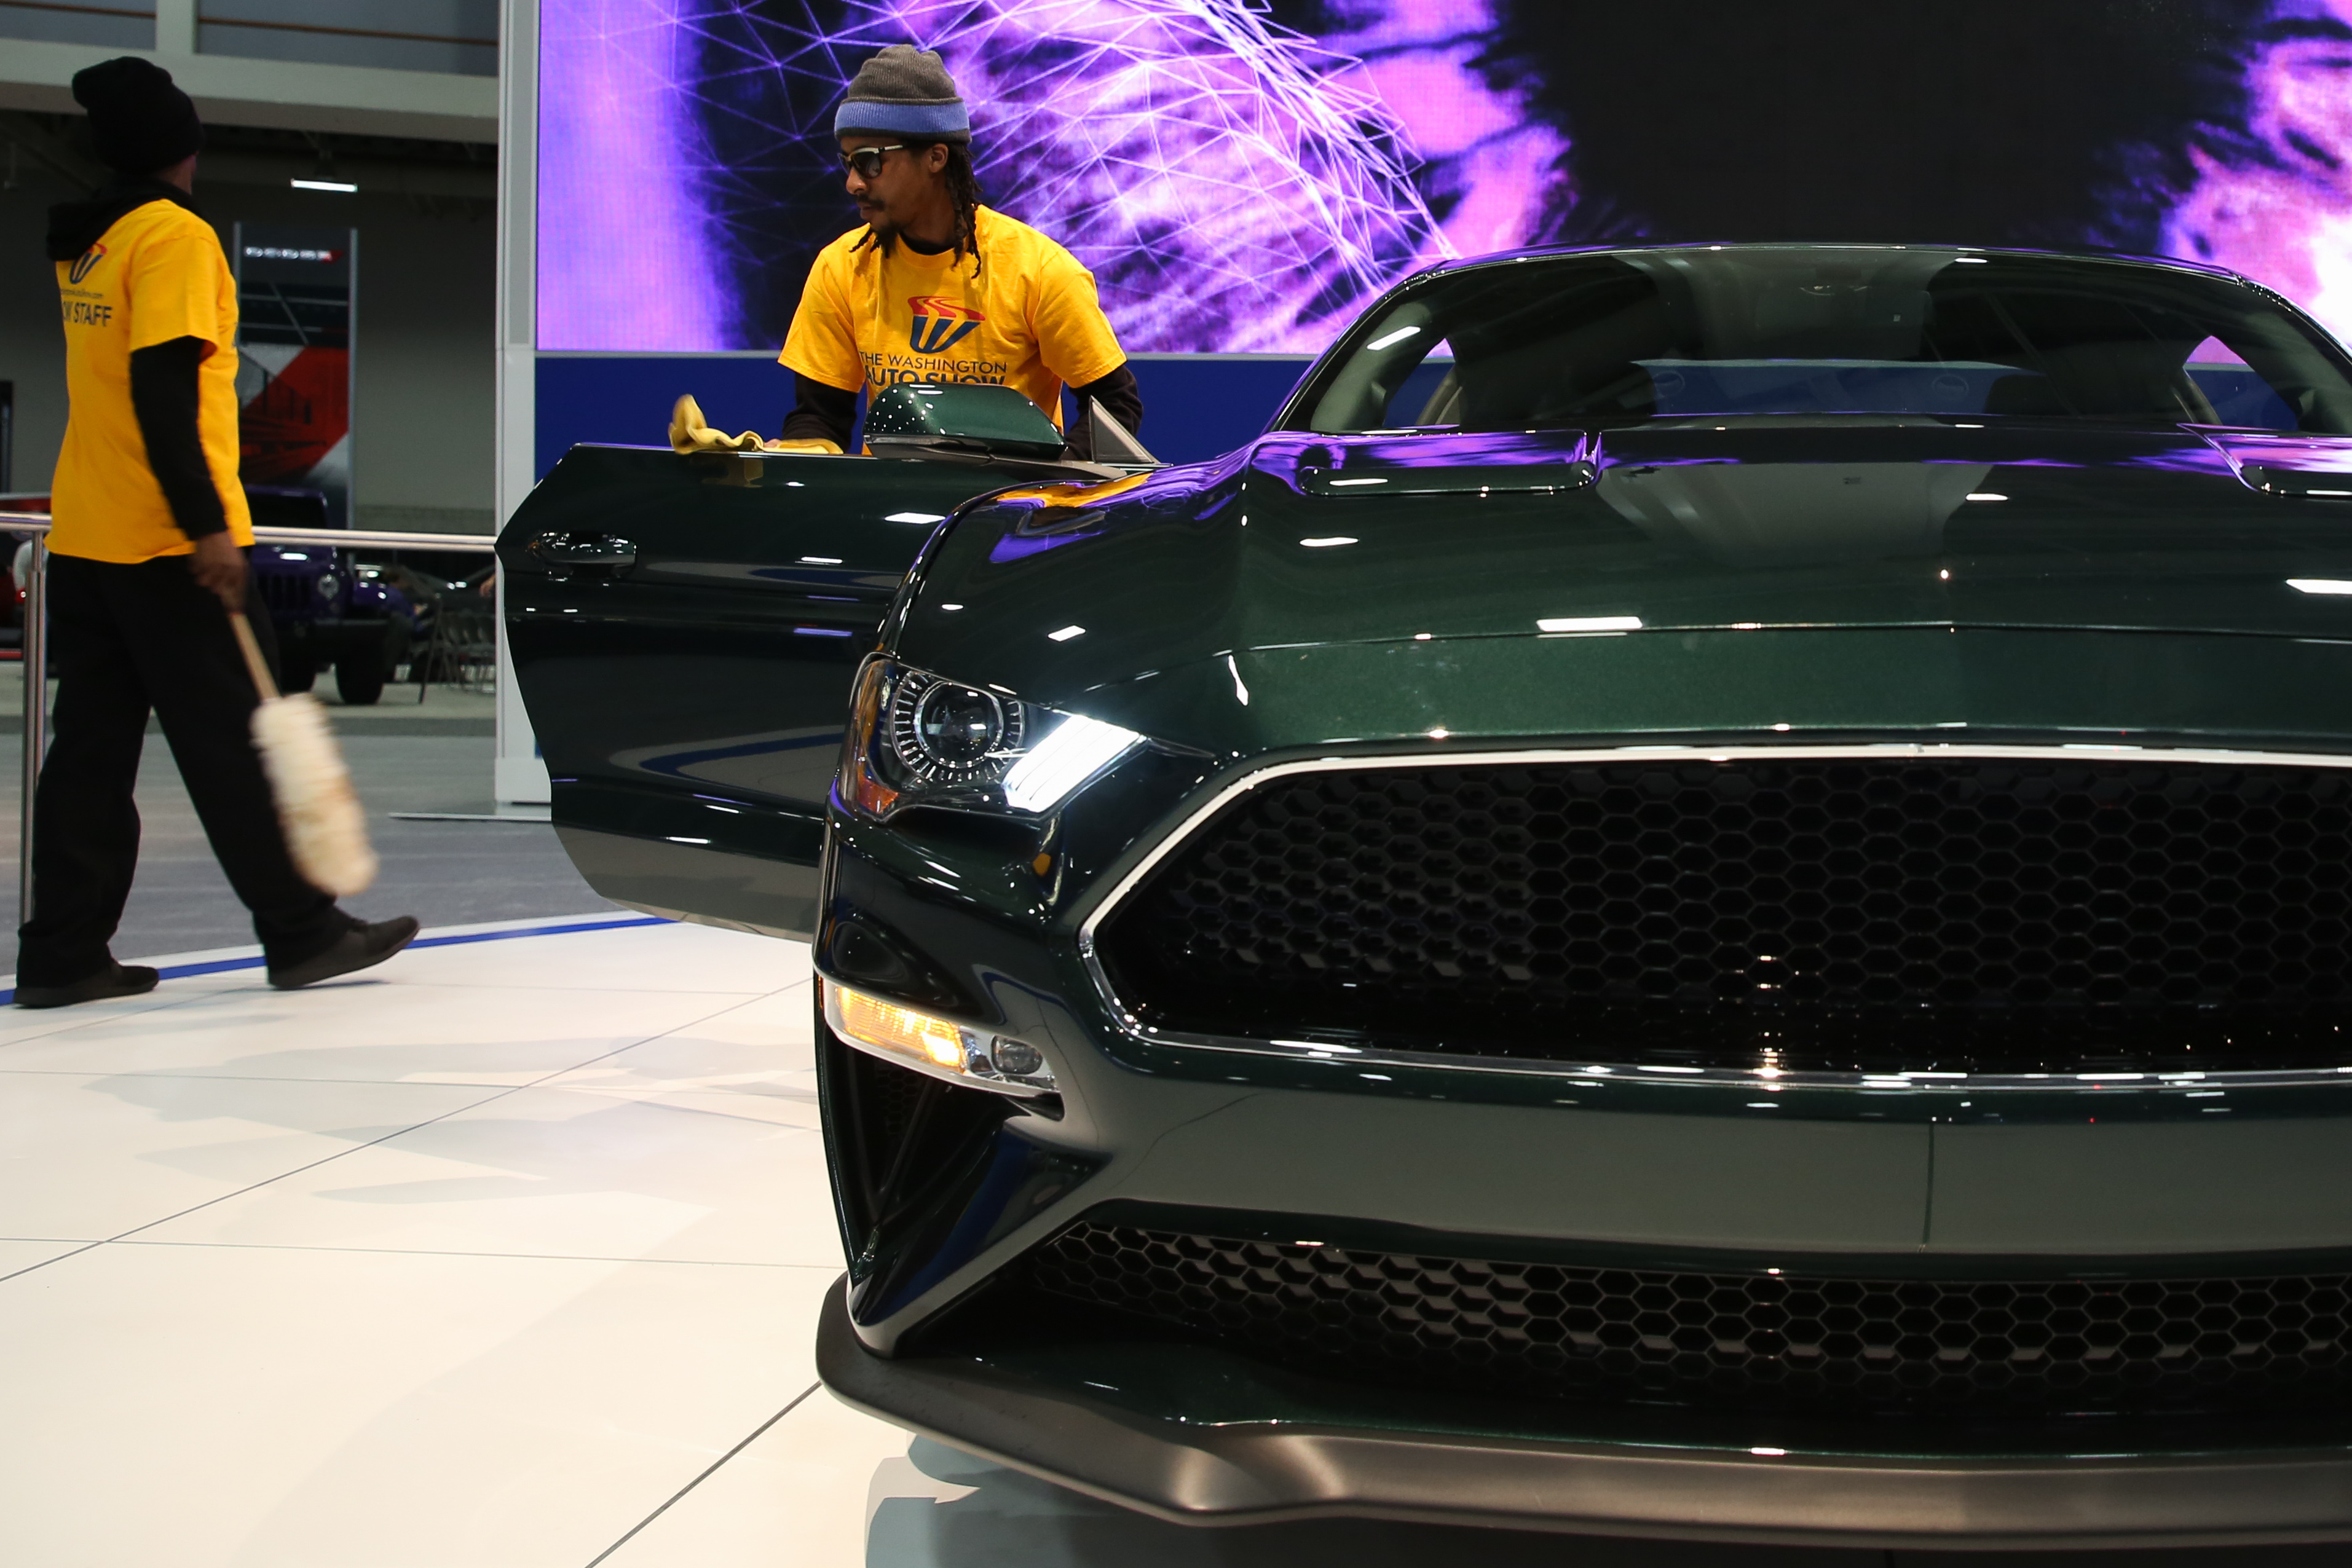 The Washington Auto Show brought the coolest cars to D.C. DC Refined